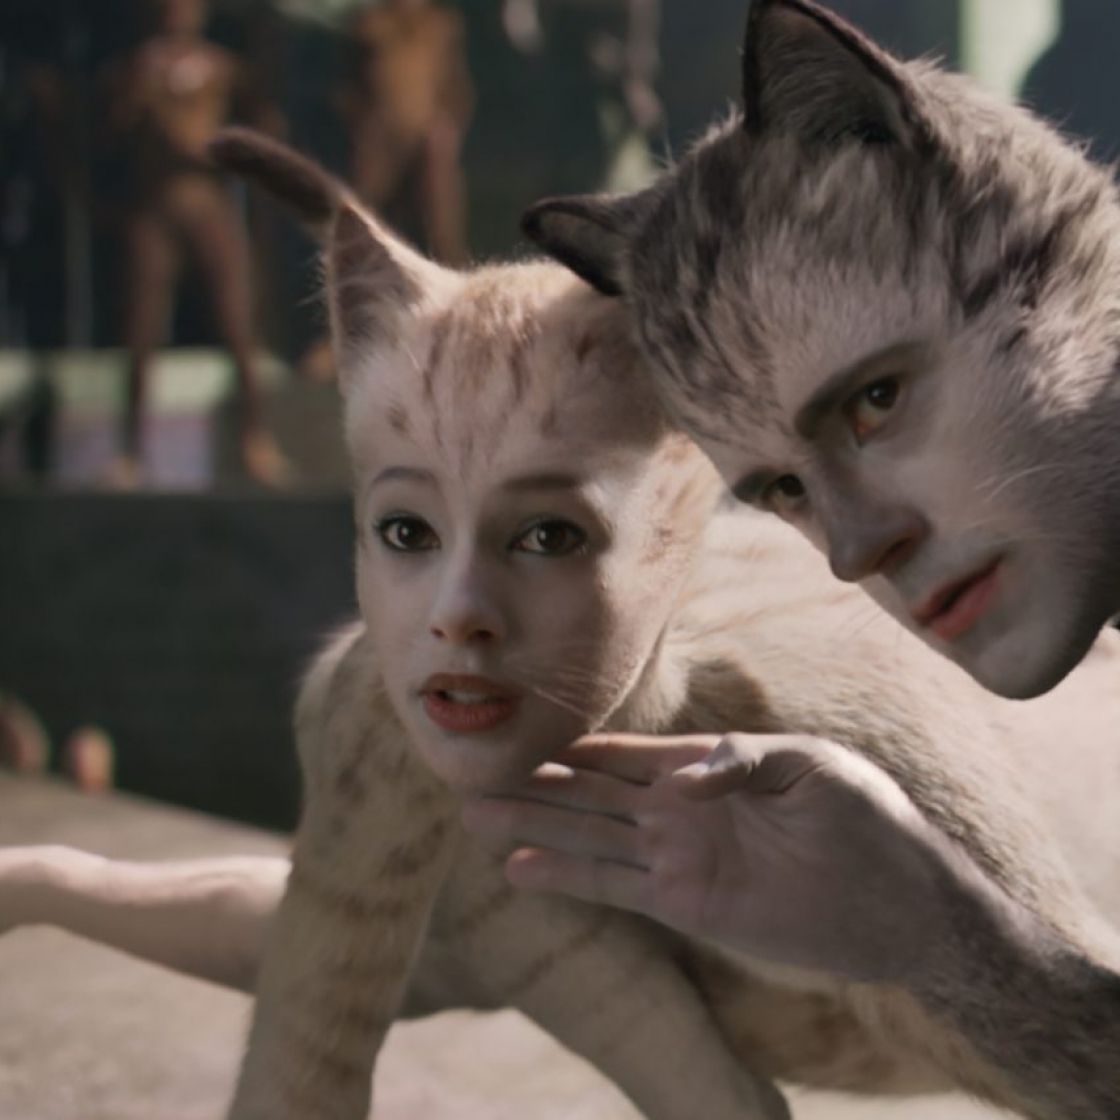 Cats Movie Trailer Internet Reacts With Outpouring Of Cats Memes